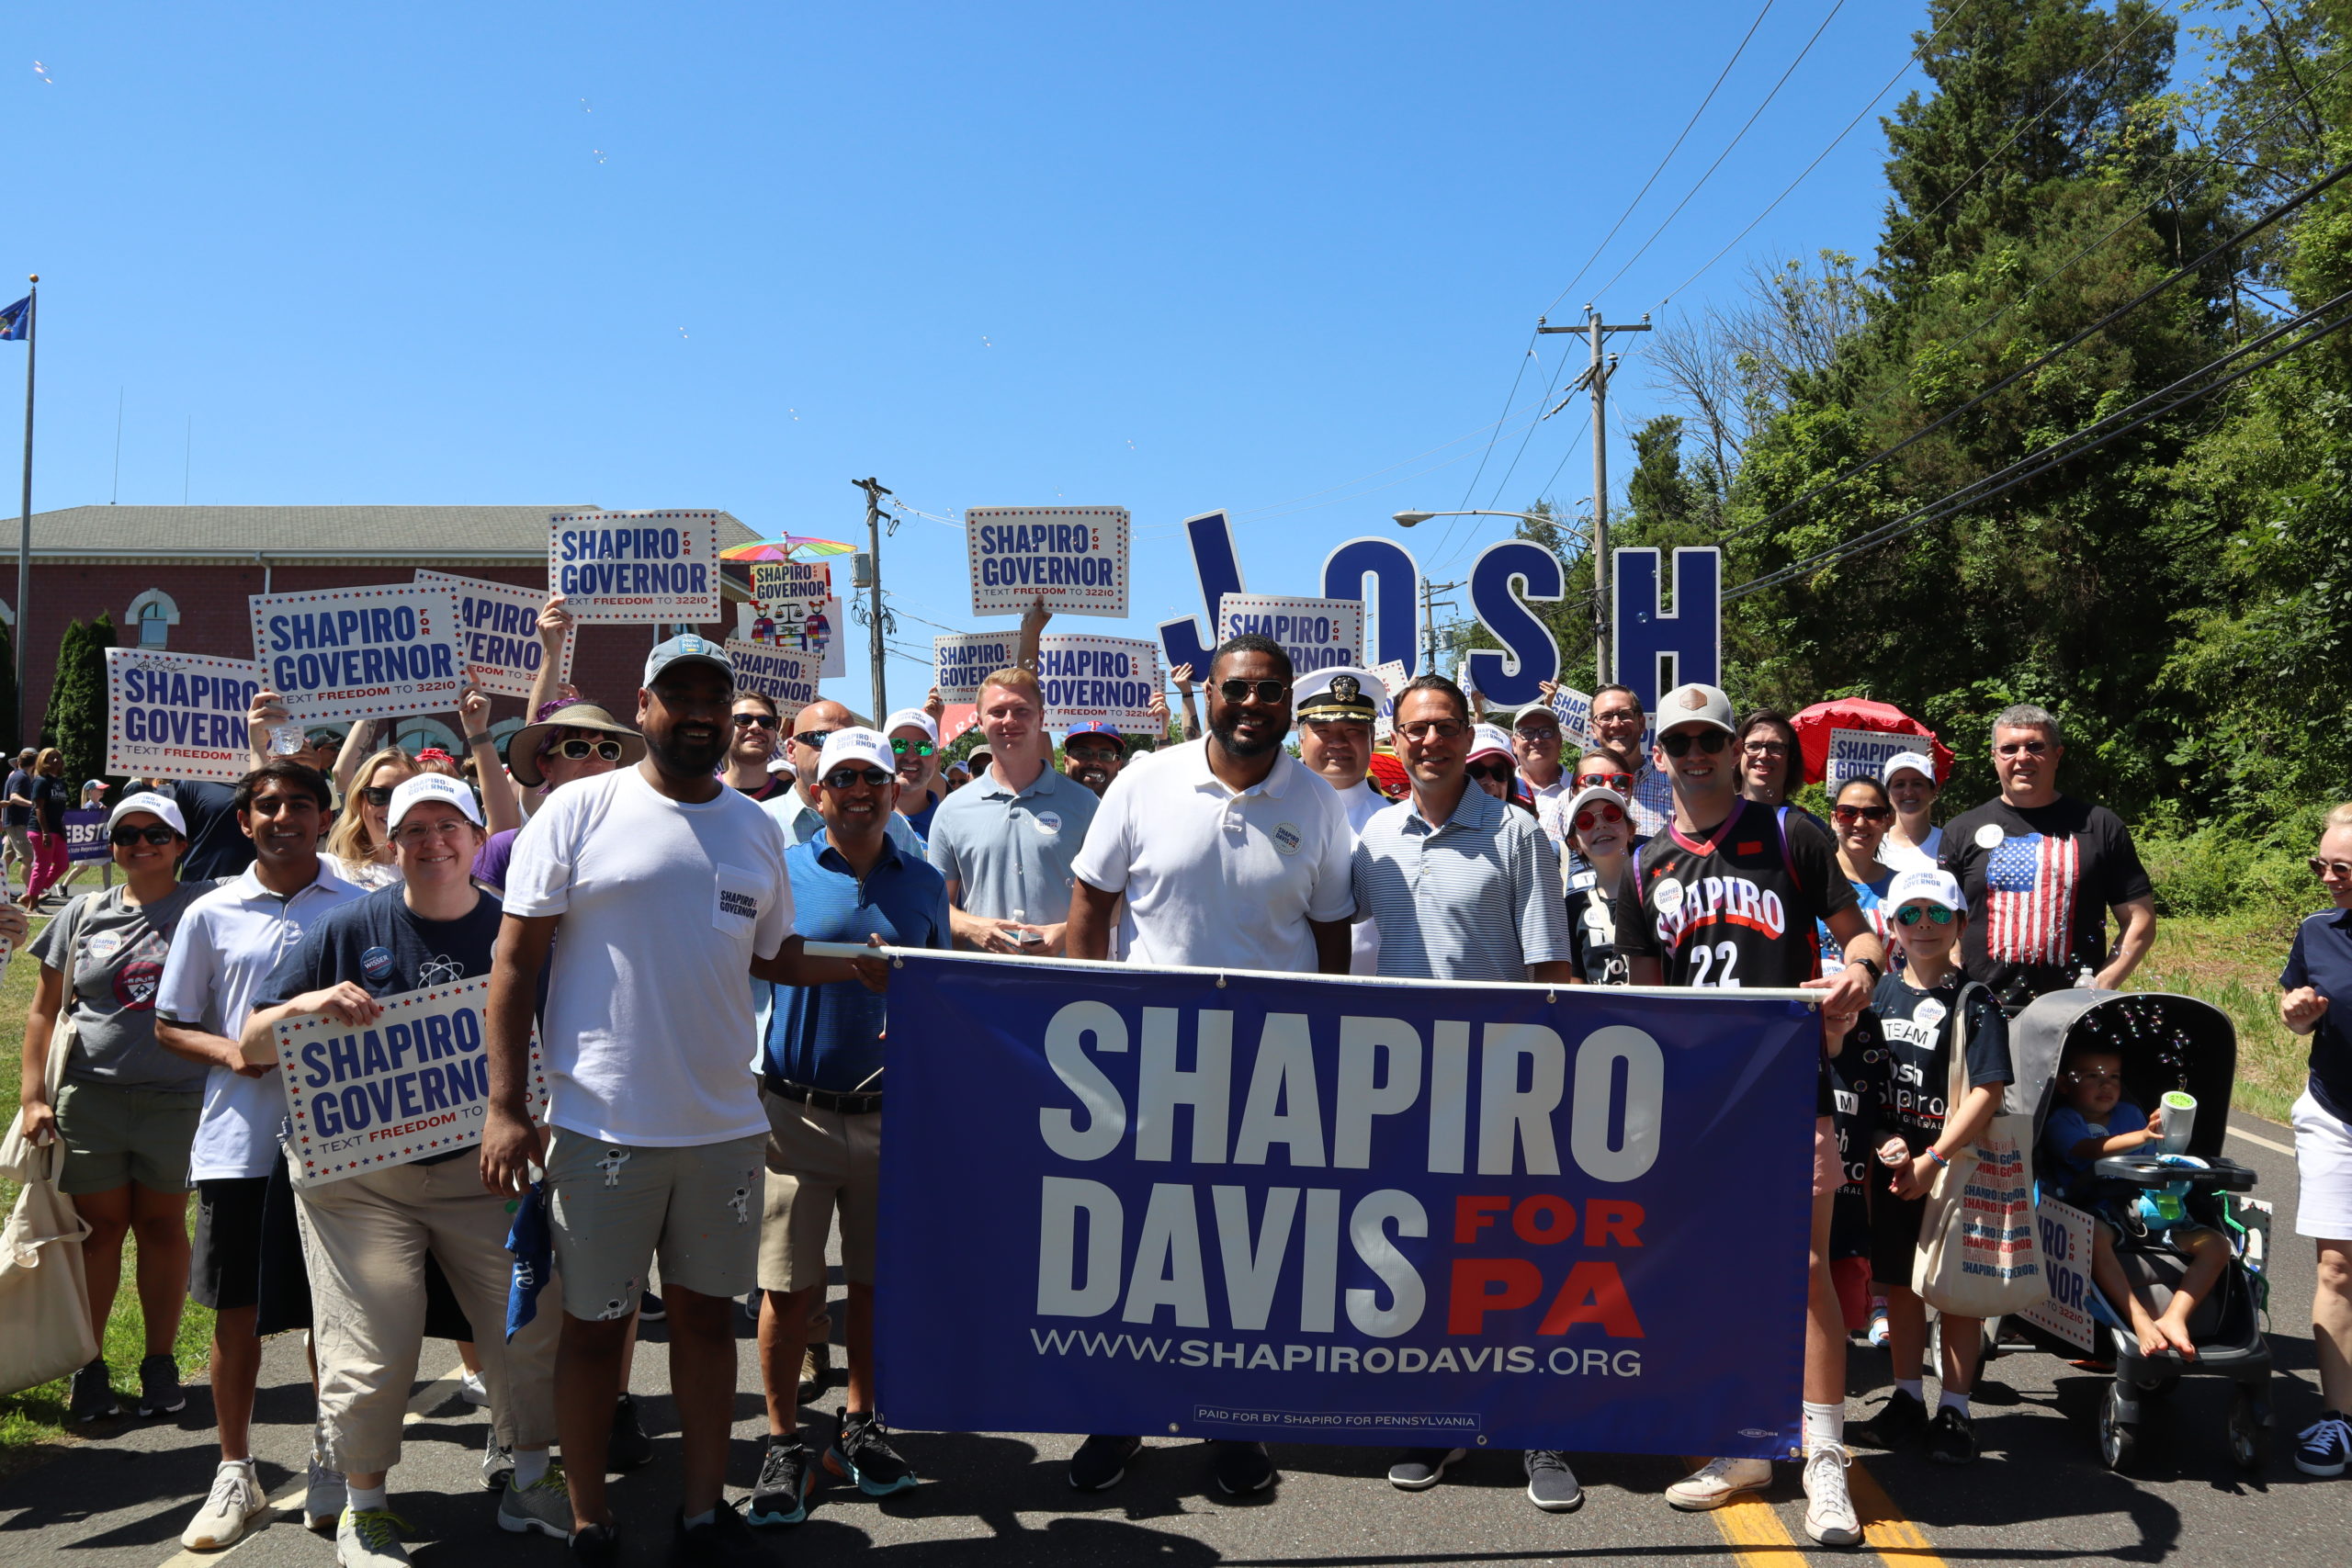 Josh and Austin holding a Shapiro Davis banner with parade marchers